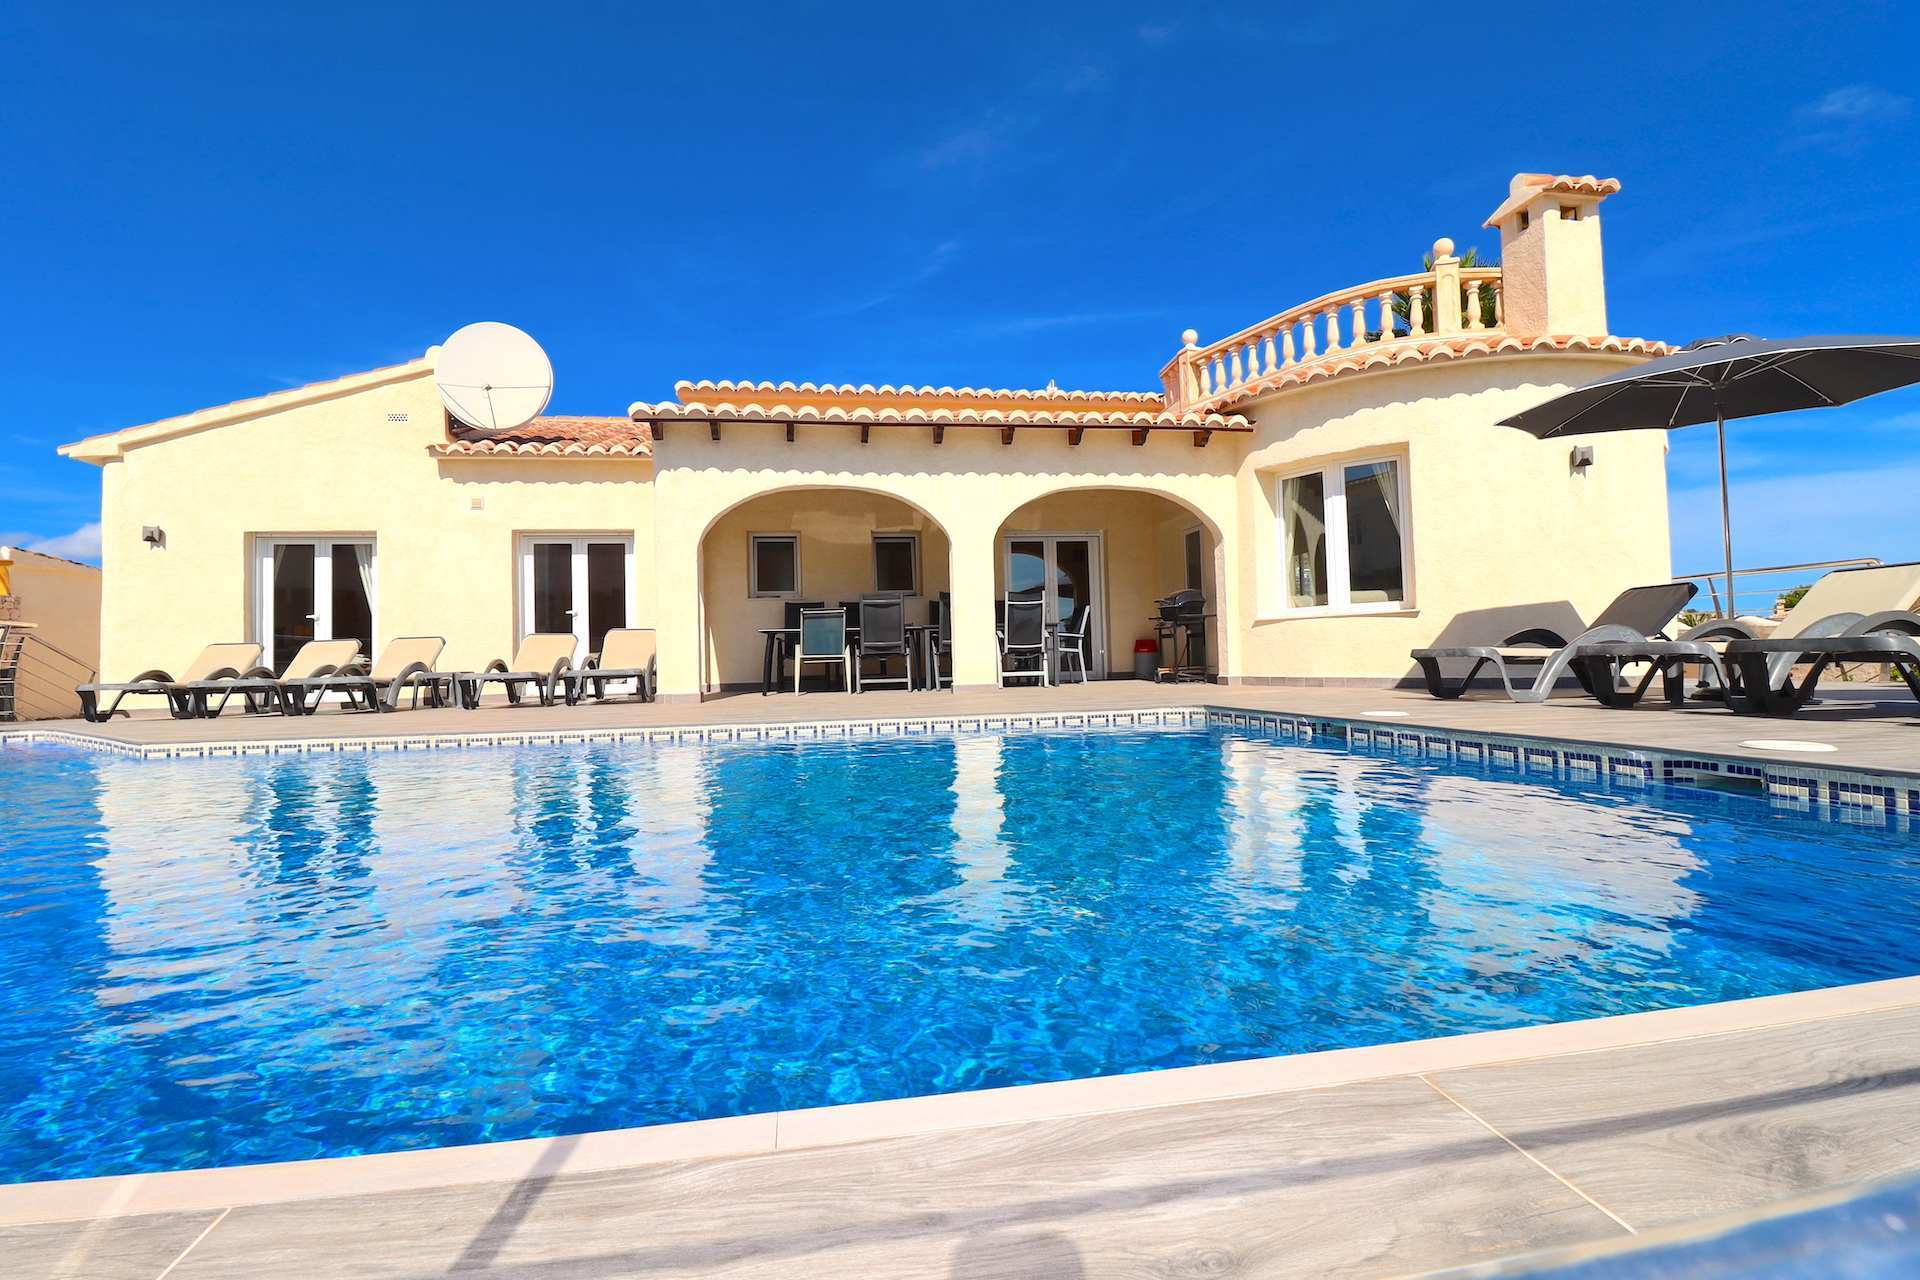 Stunning Villa with 5 Bedrooms and sea views